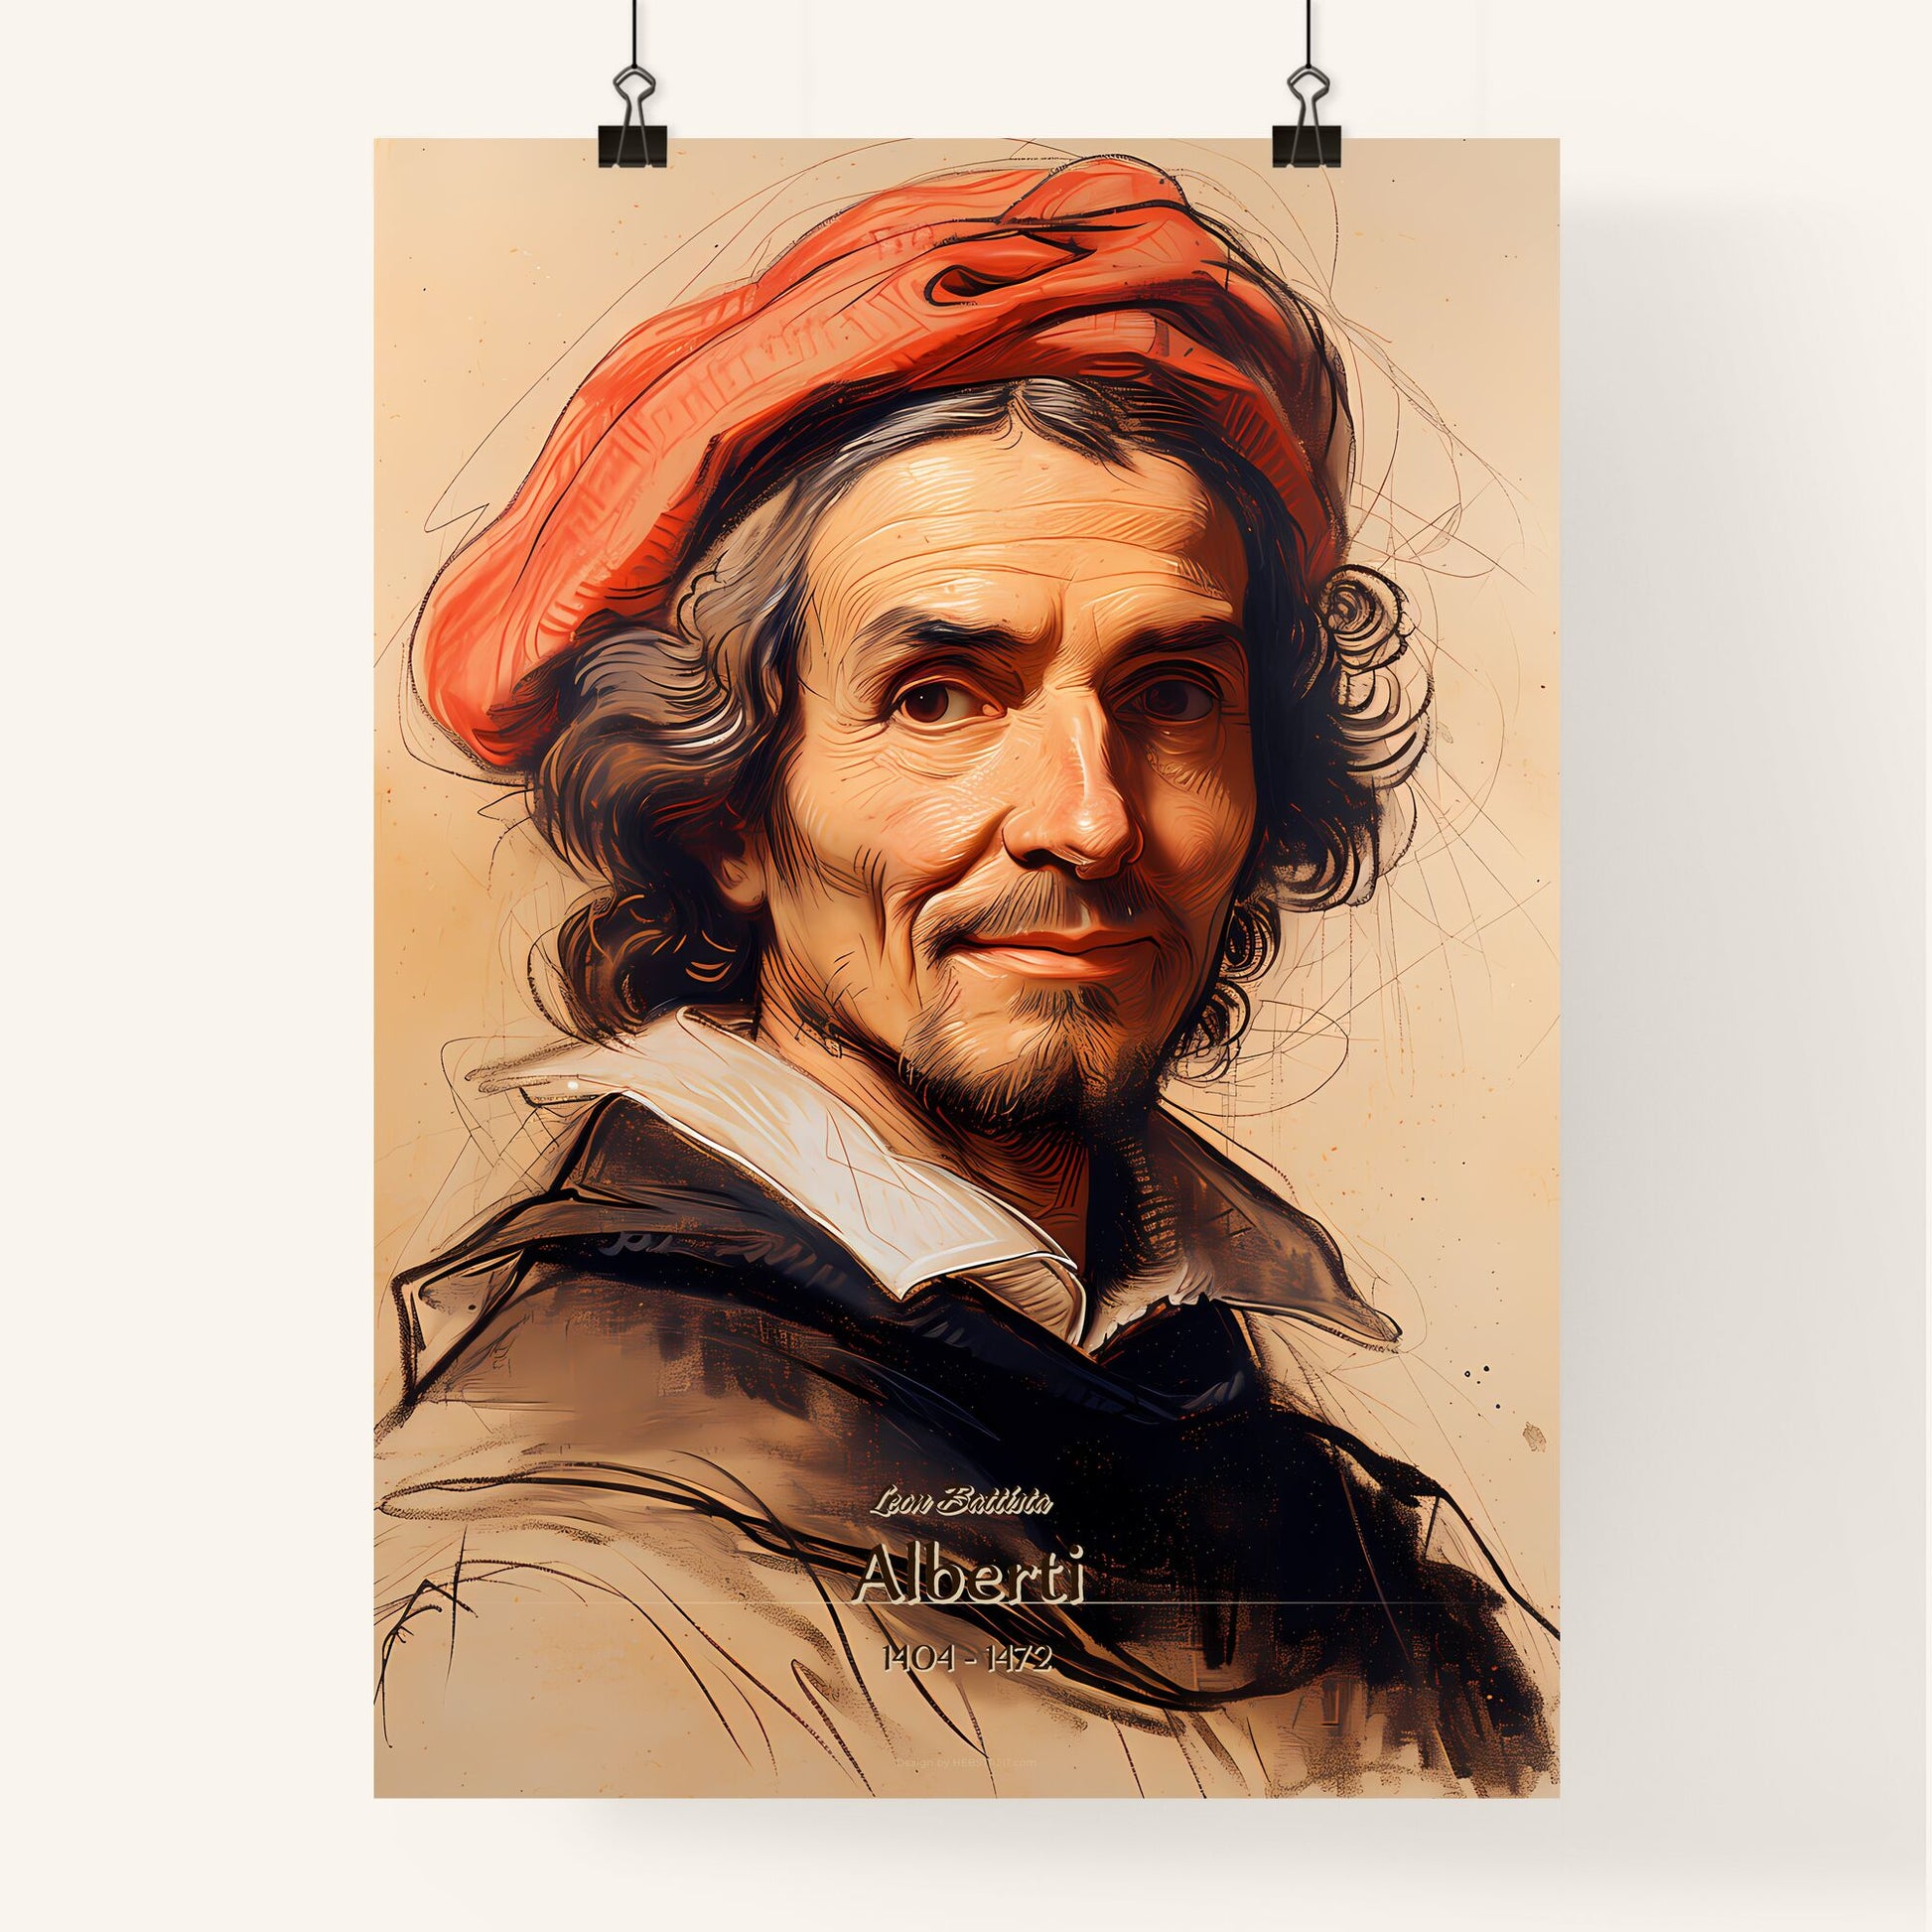 Leon Battista, Alberti, 1404 - 1472, A Poster of a man with a red hat Default Title